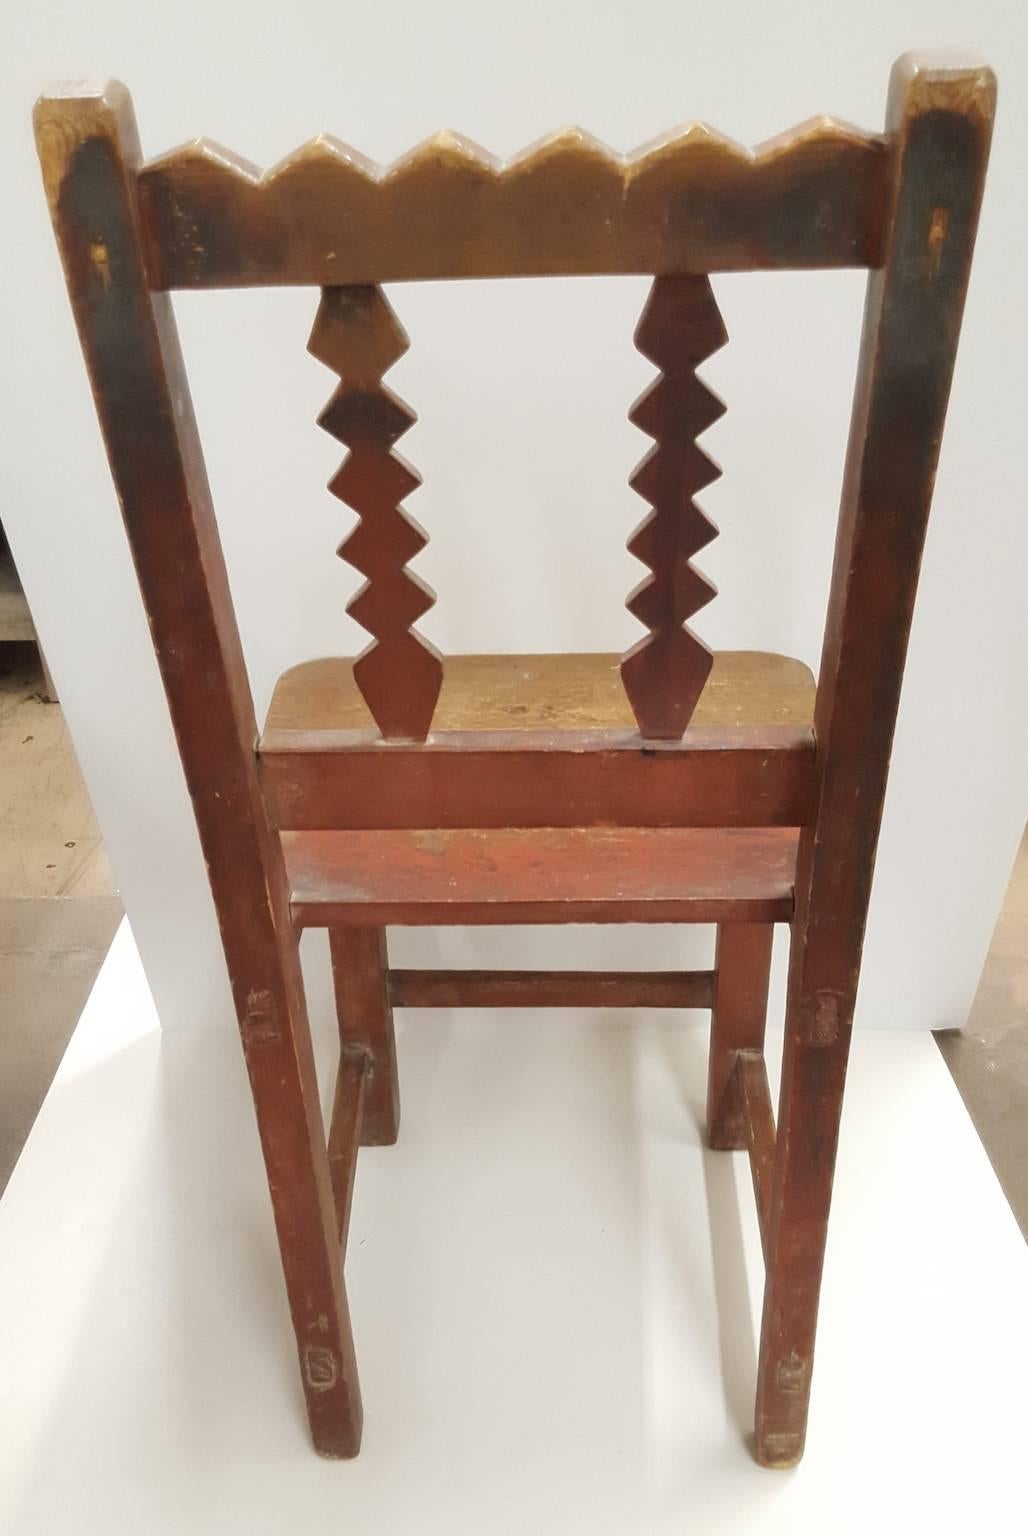 Hand-Crafted Two 19th Century, Small Painted Wood Chairs